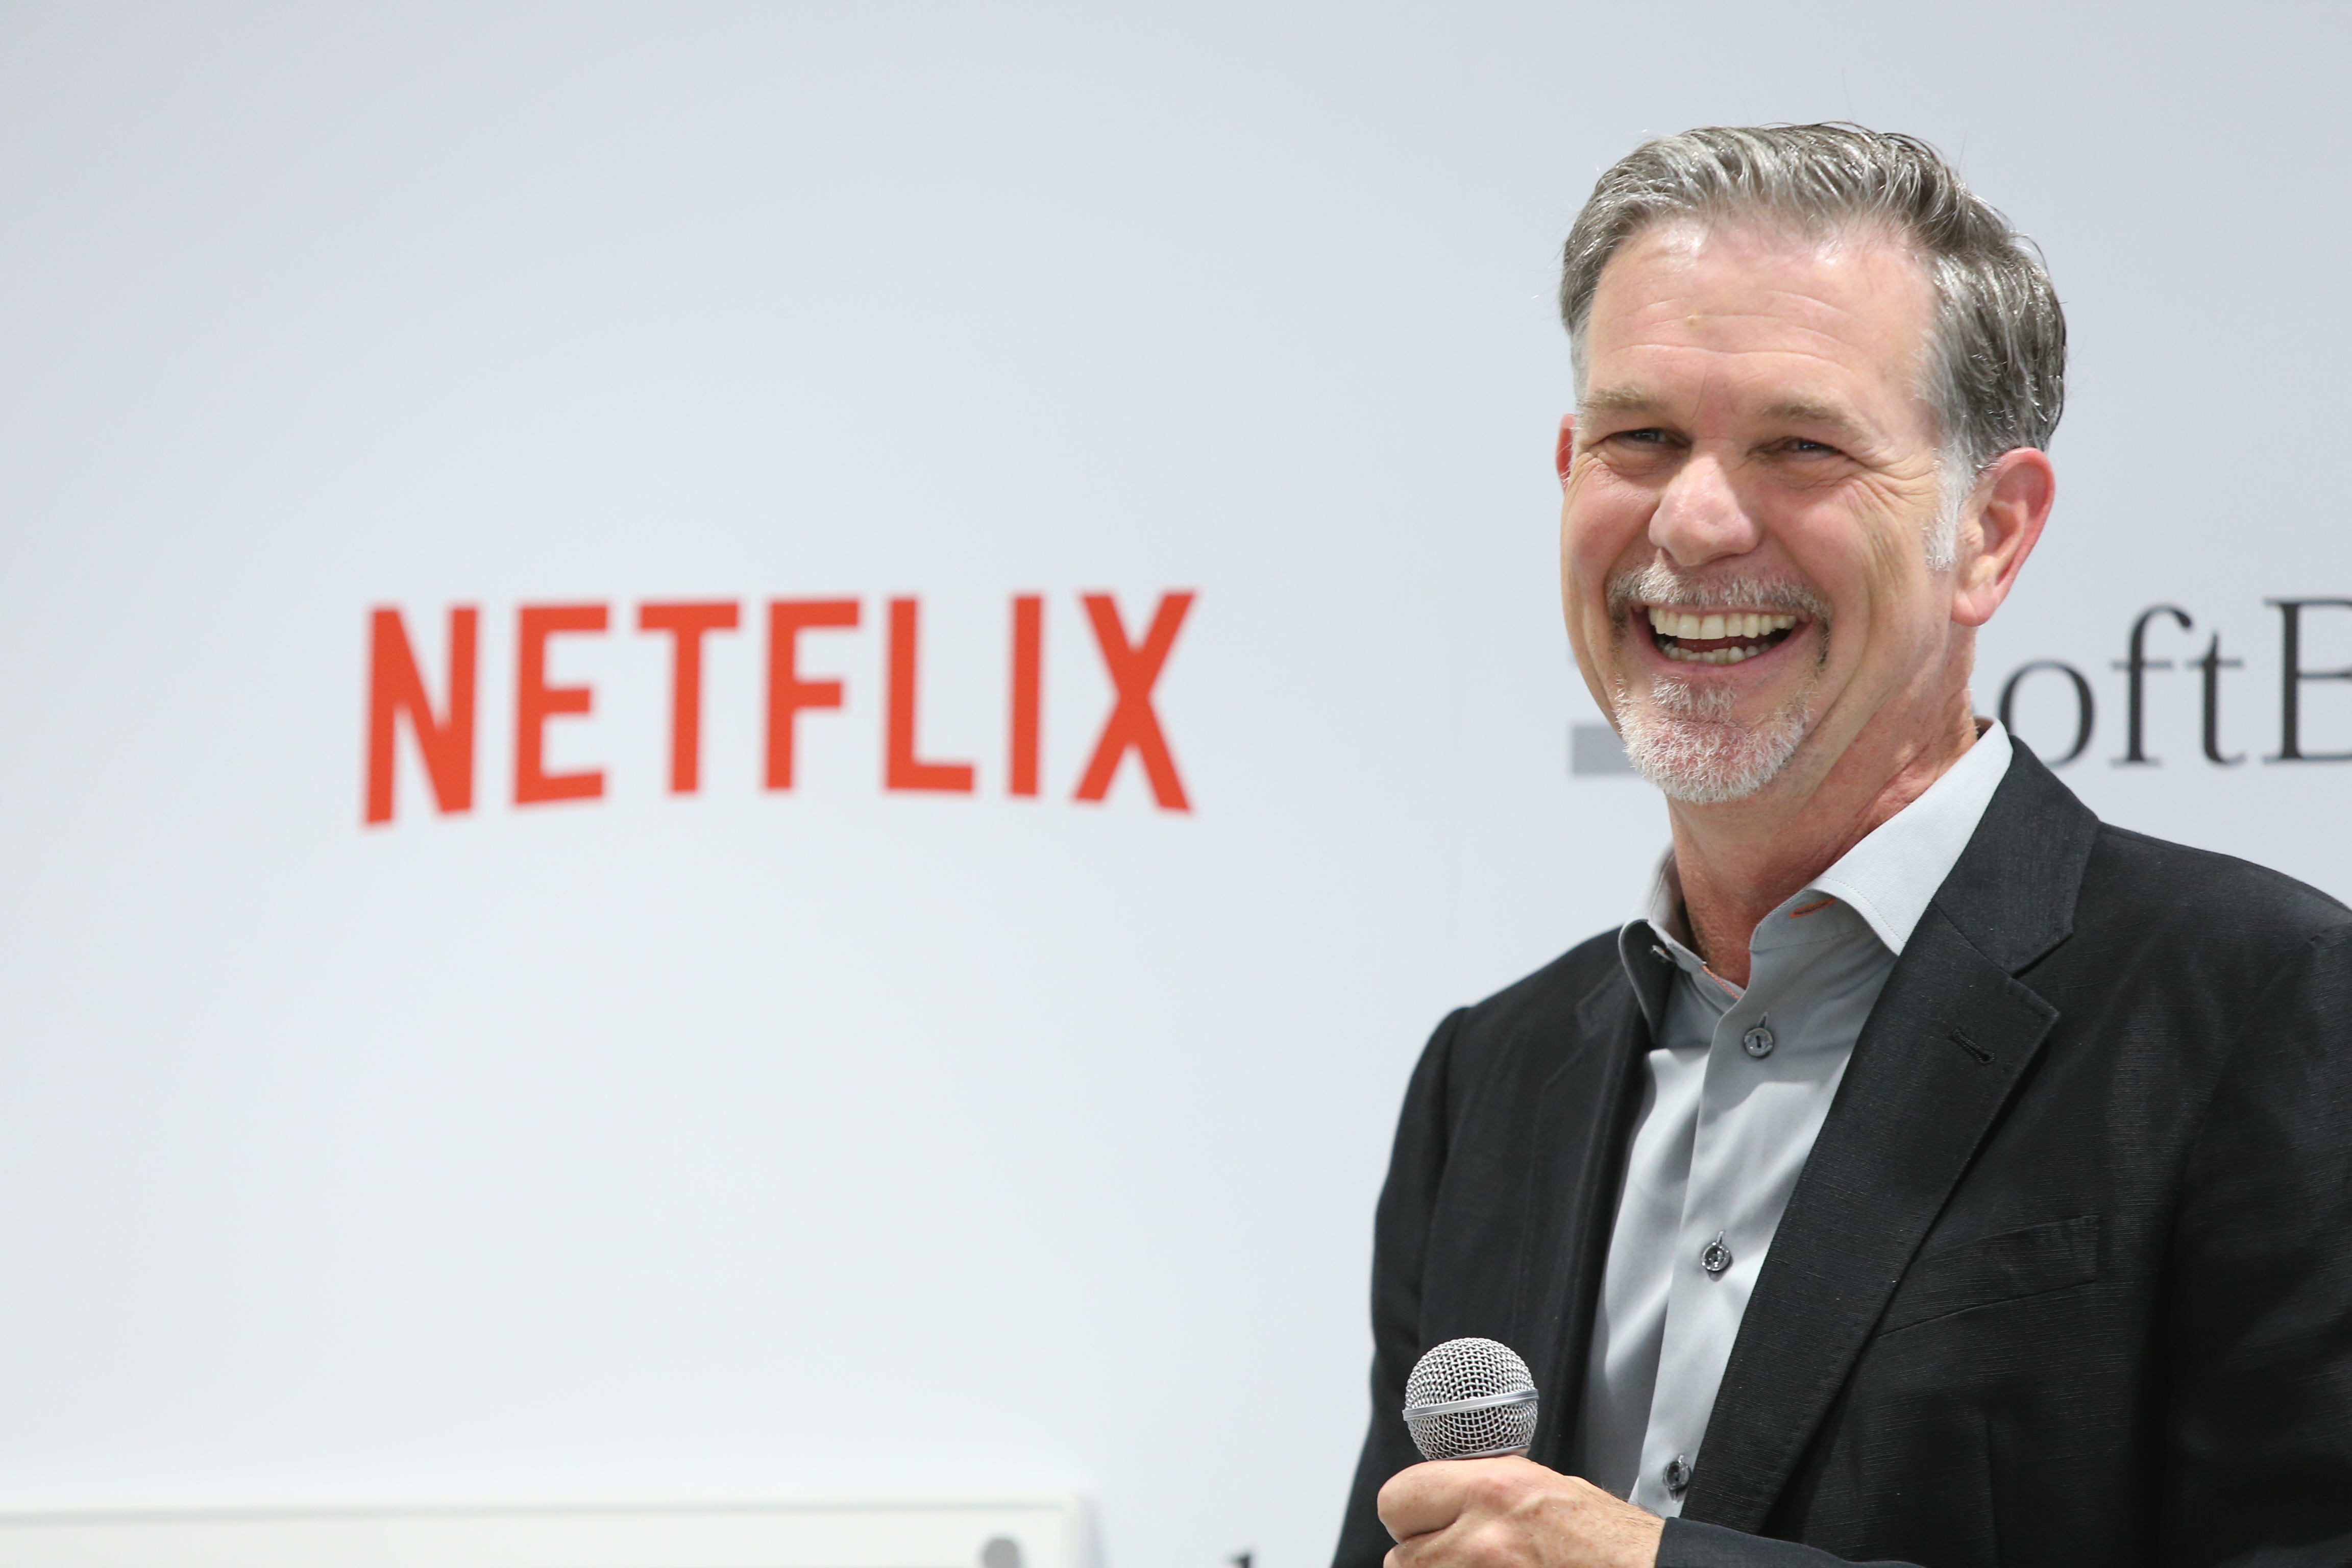 Reed Hastings, founder and CEO of Netflix Inc. attends the launch event for Netflix service in Japan at SoftBank Ginza store on September 2, 2015 in Tokyo, Japan. (Ken Ishii&mdash;Getty Images)